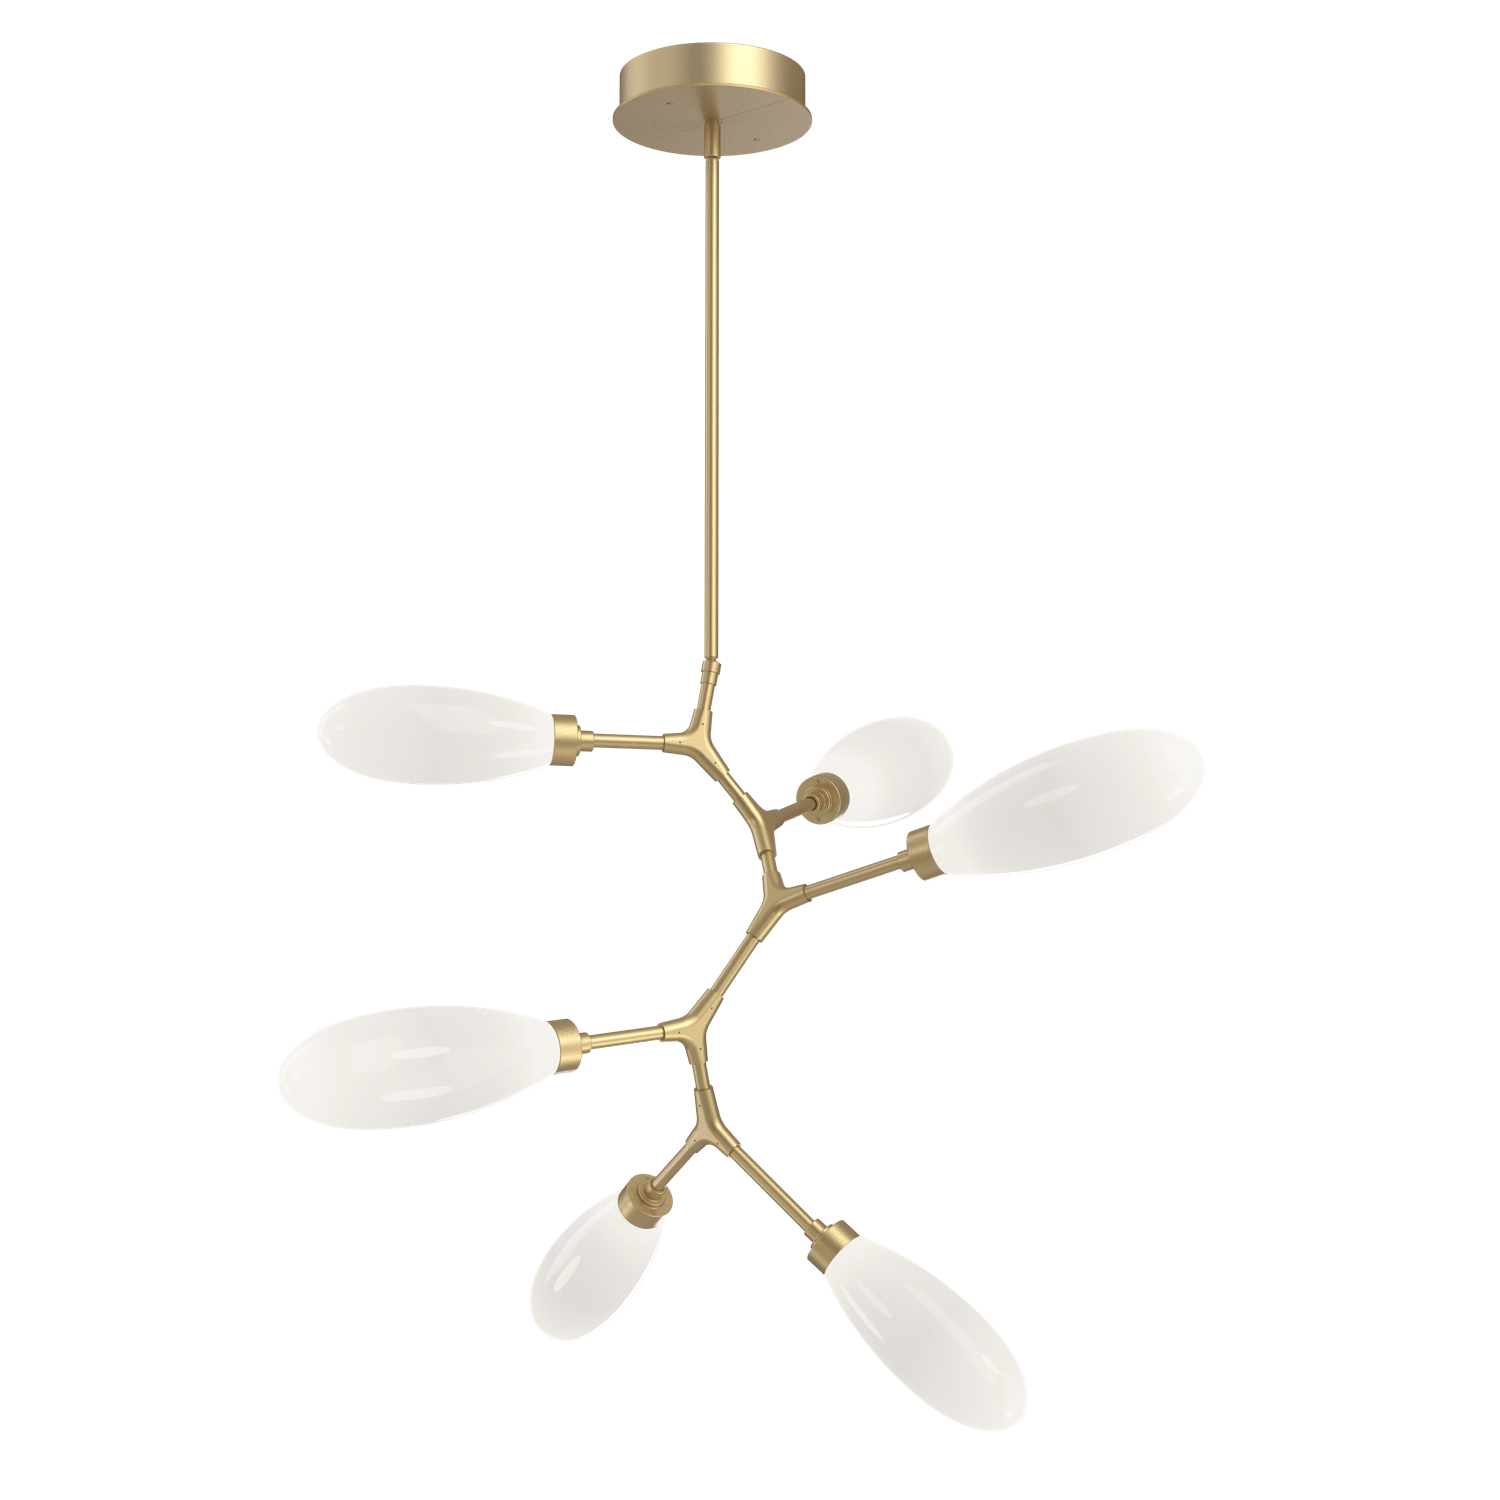 CHB0071-VA-GB-WL-LL-Hammerton-Studio-Fiori-6-light-organic-vine-chandelier-with-gilded-brass-finish-and-opal-white-glass-shades-and-LED-lamping